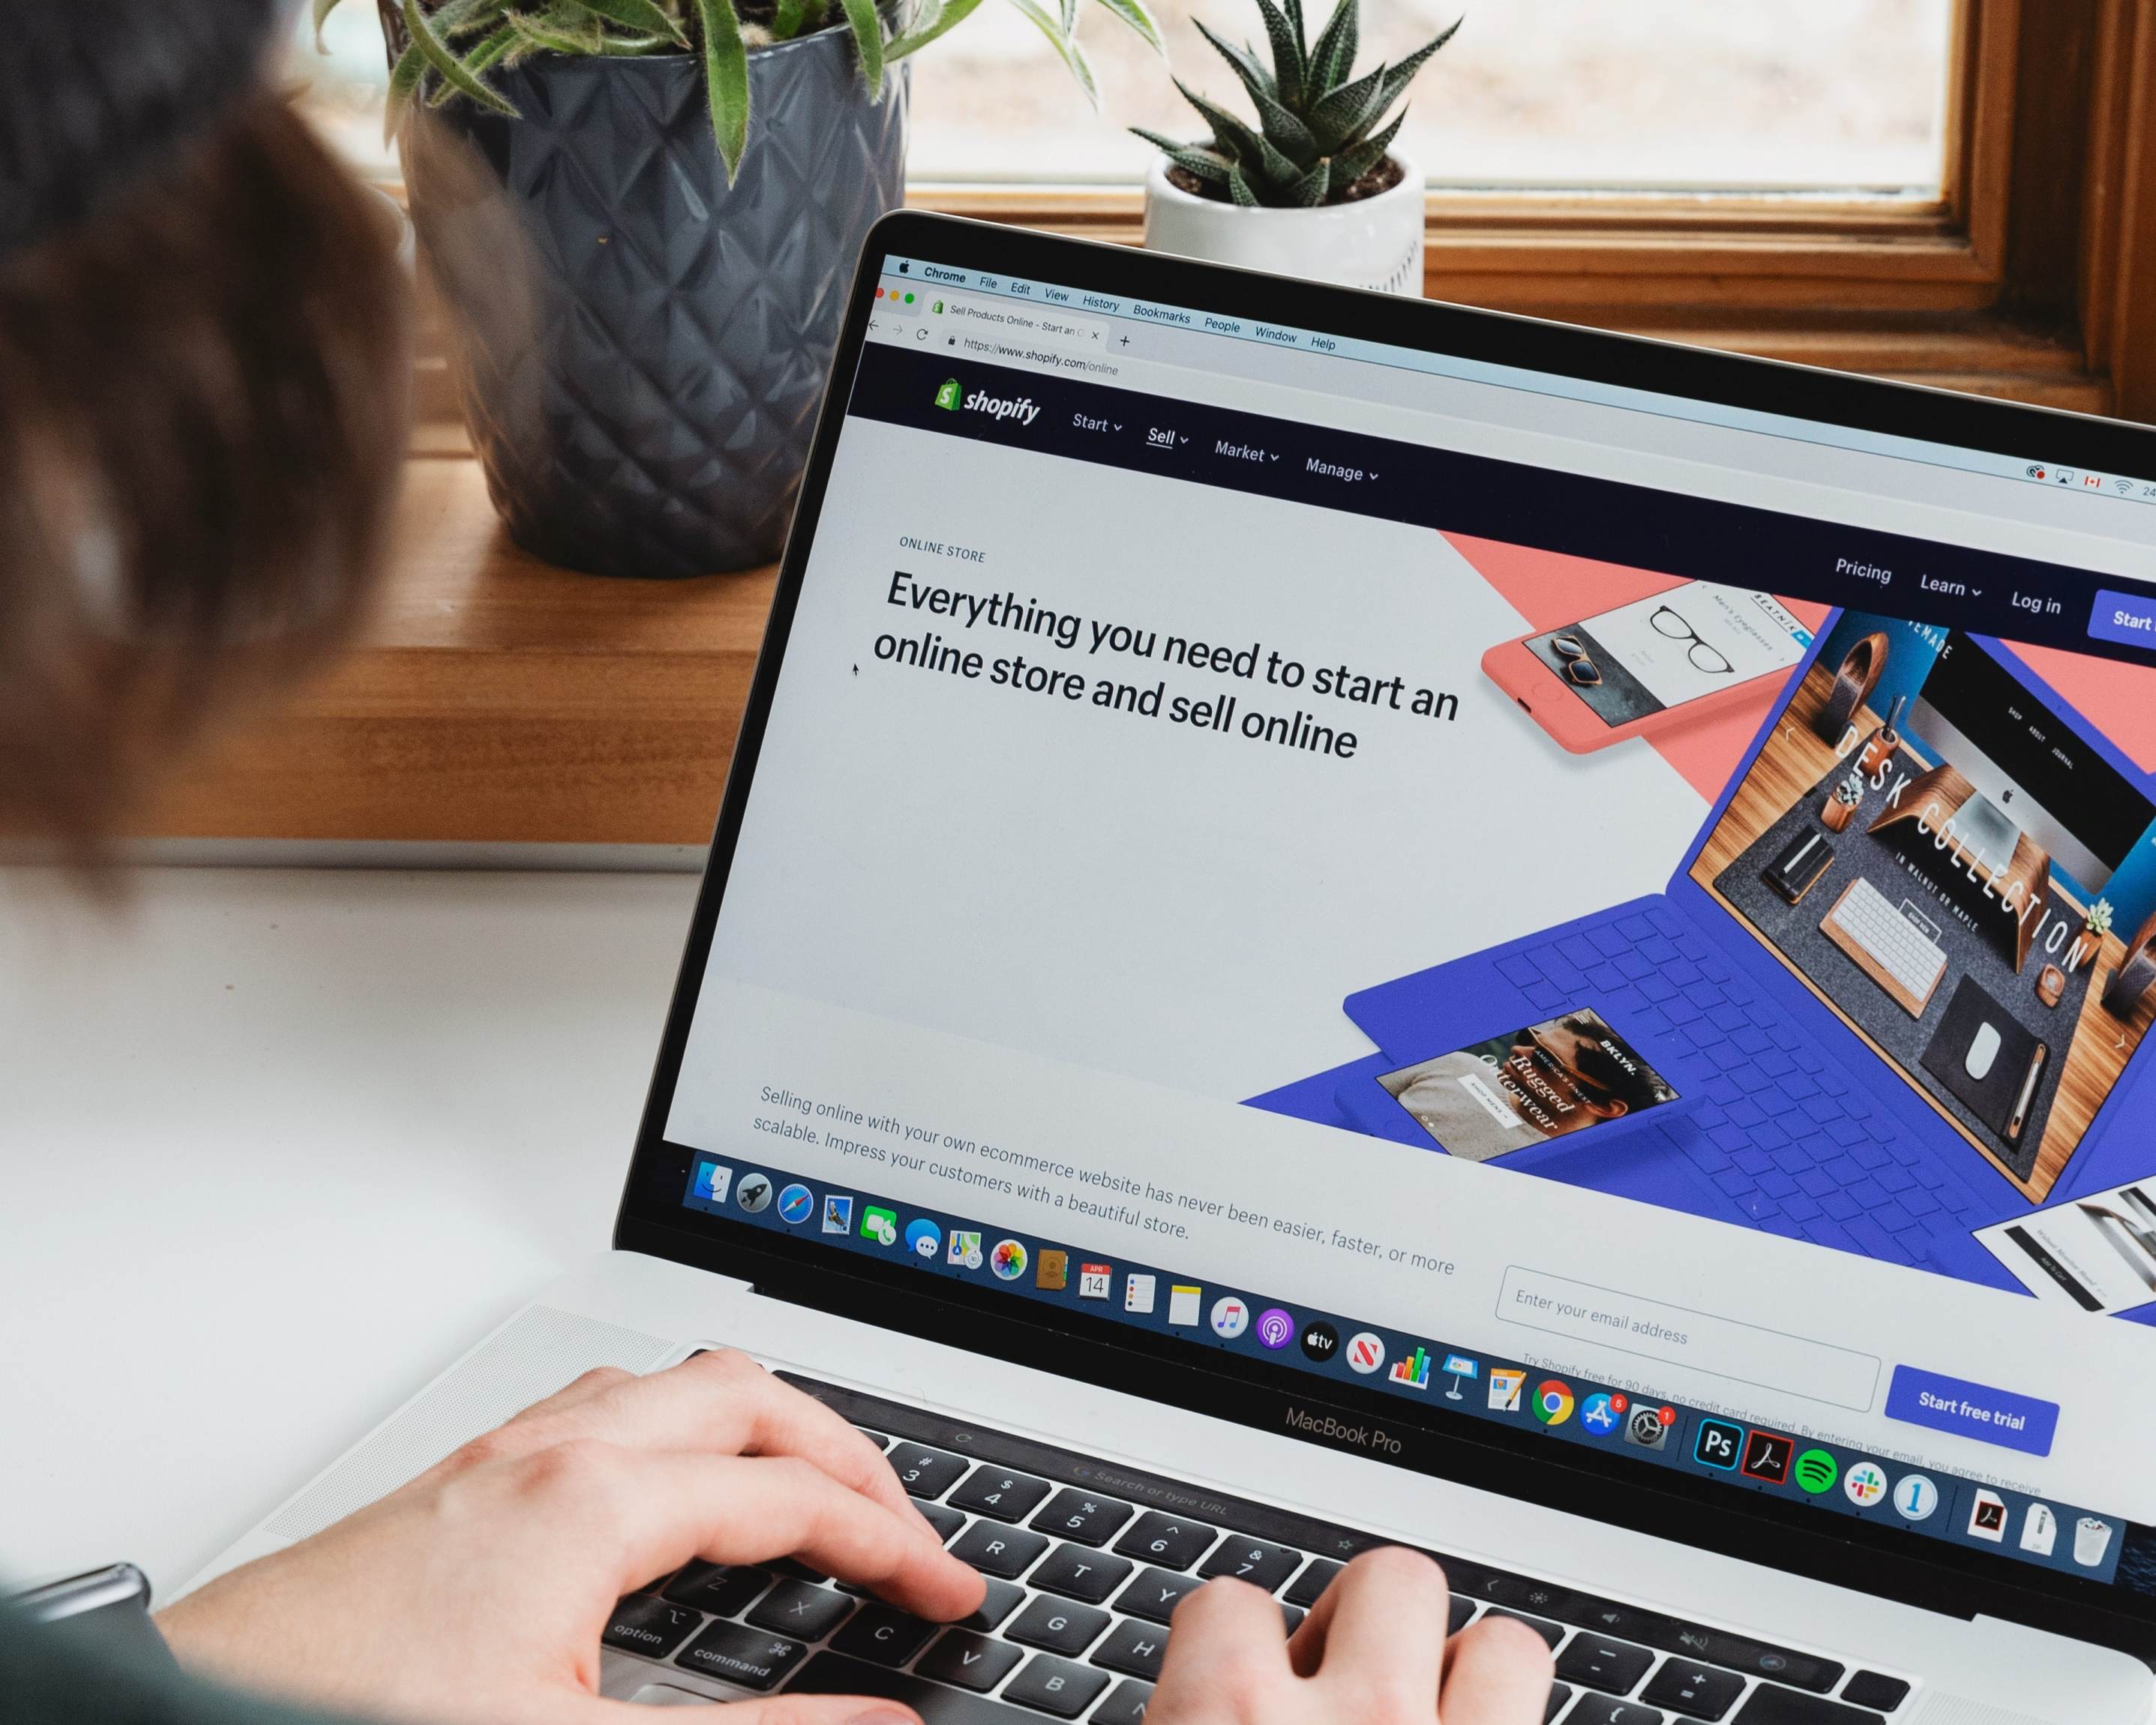 Get Noticed: How to Write the Best Product Description For Shopify